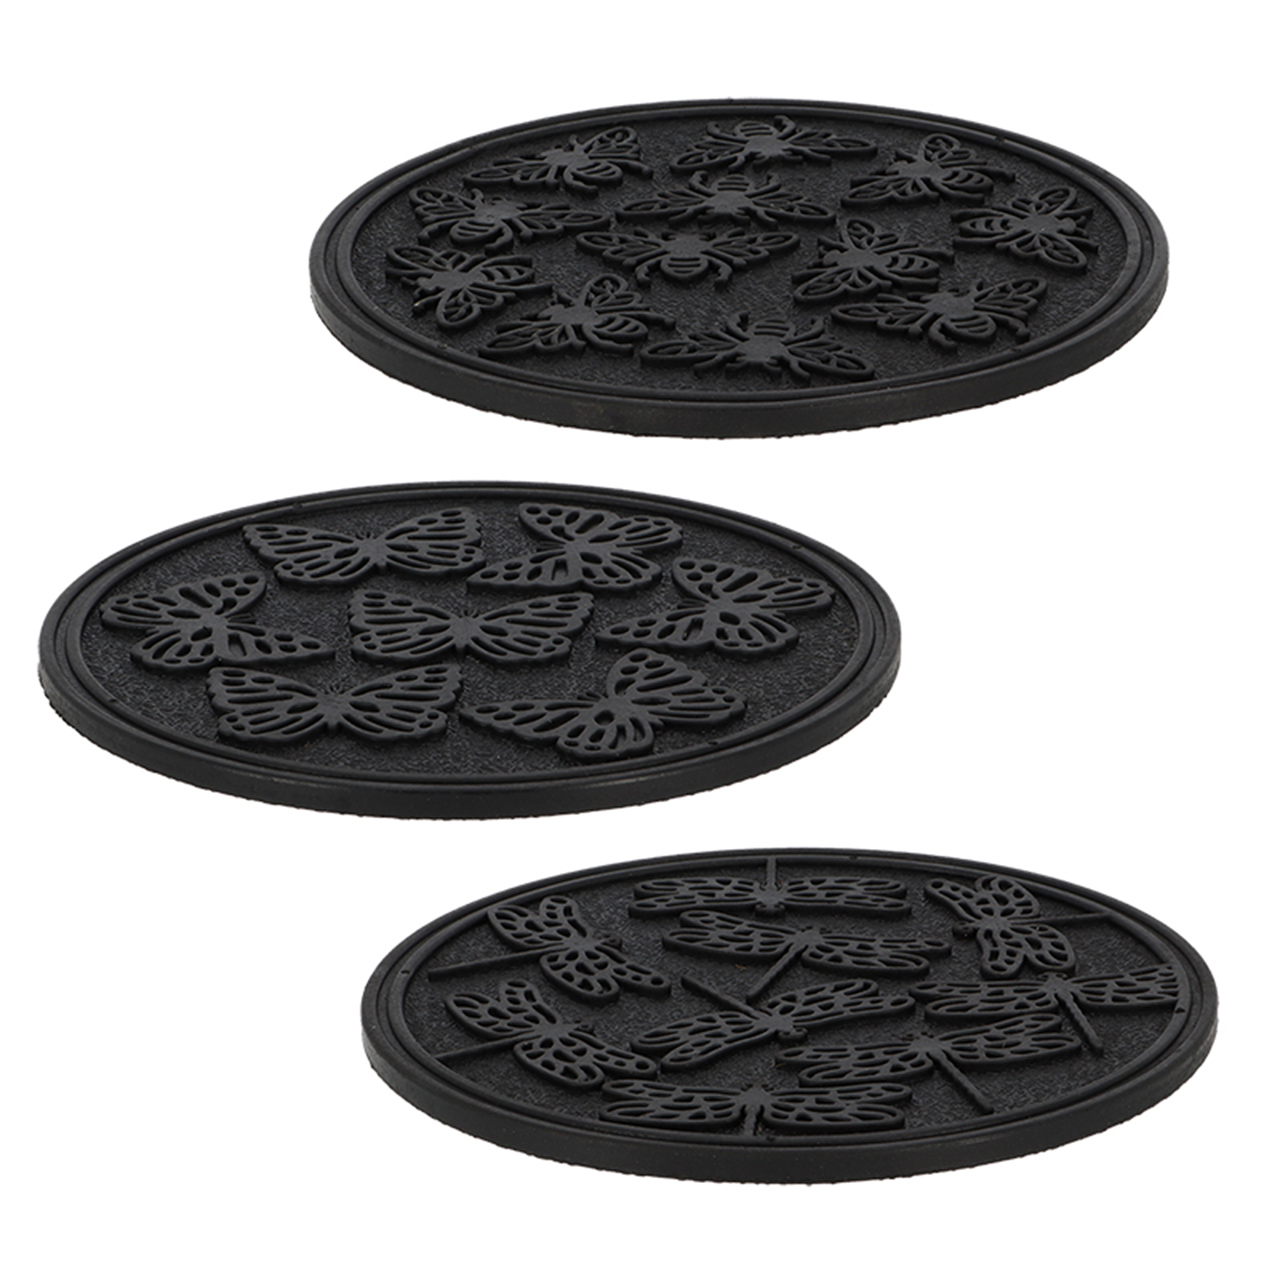 Rubber Stepping Stones ? Set of 3